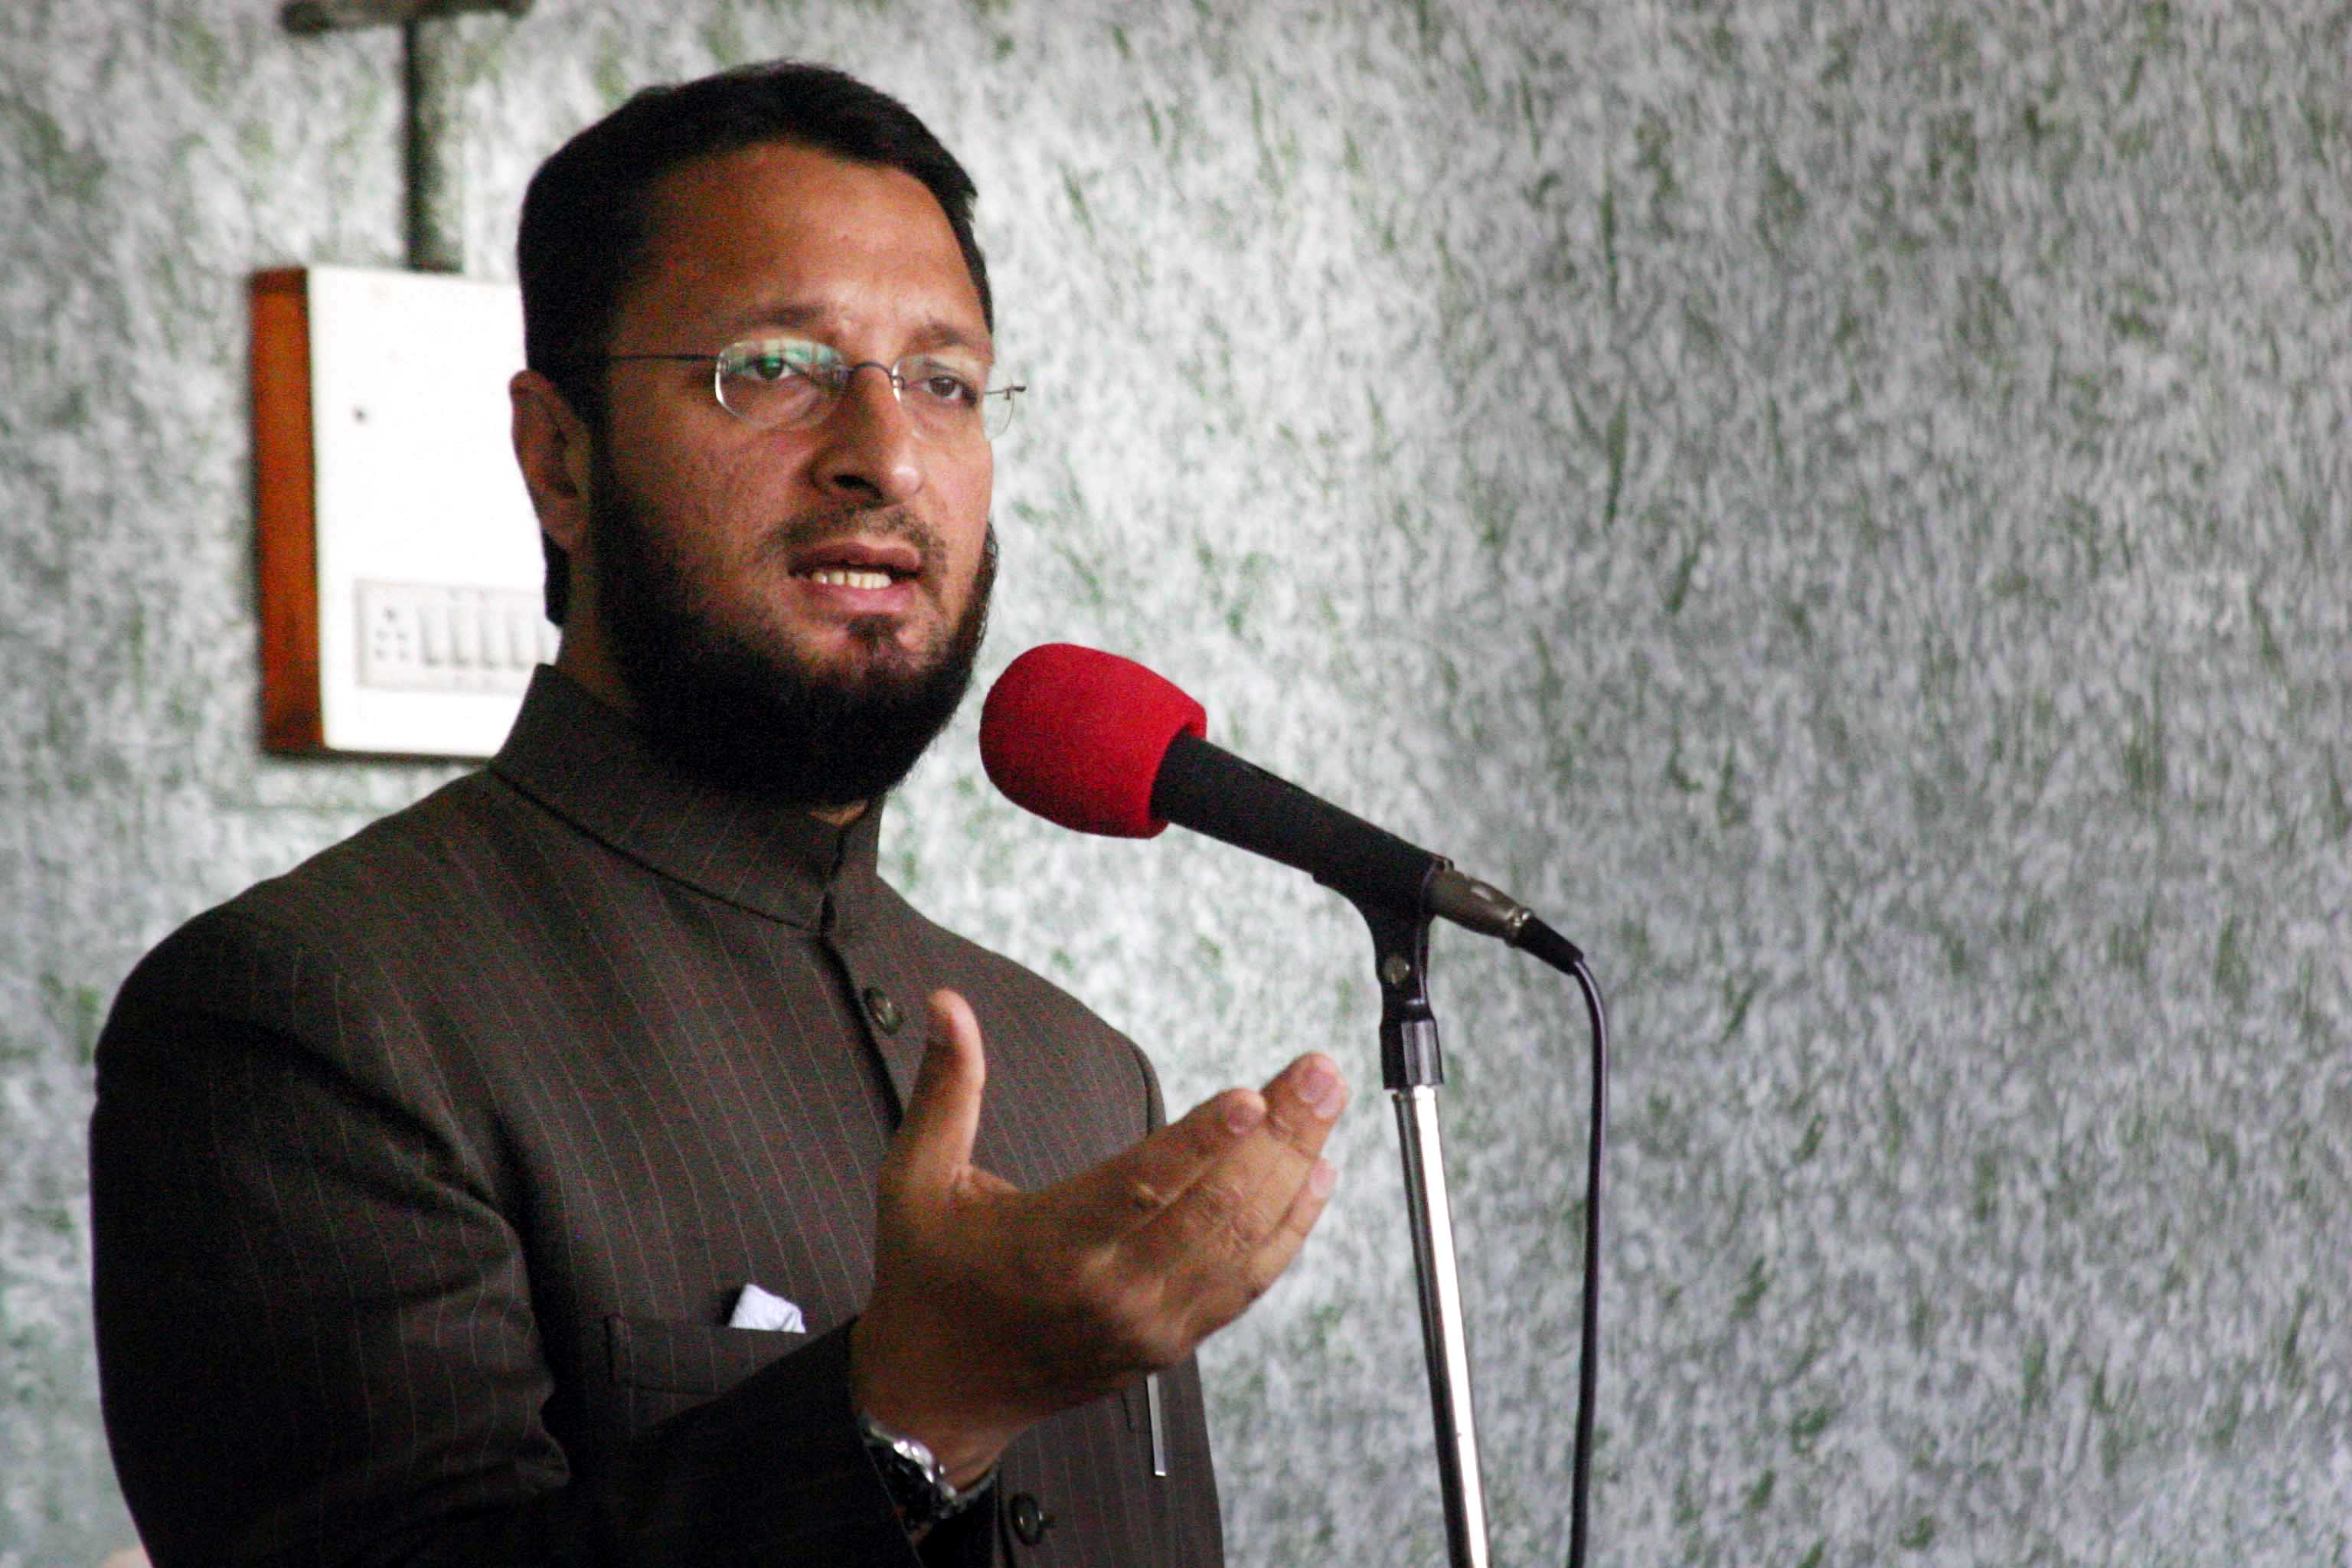 'Not neutral': Owaisi flays selection of Sri Sri for Ayodhya panel